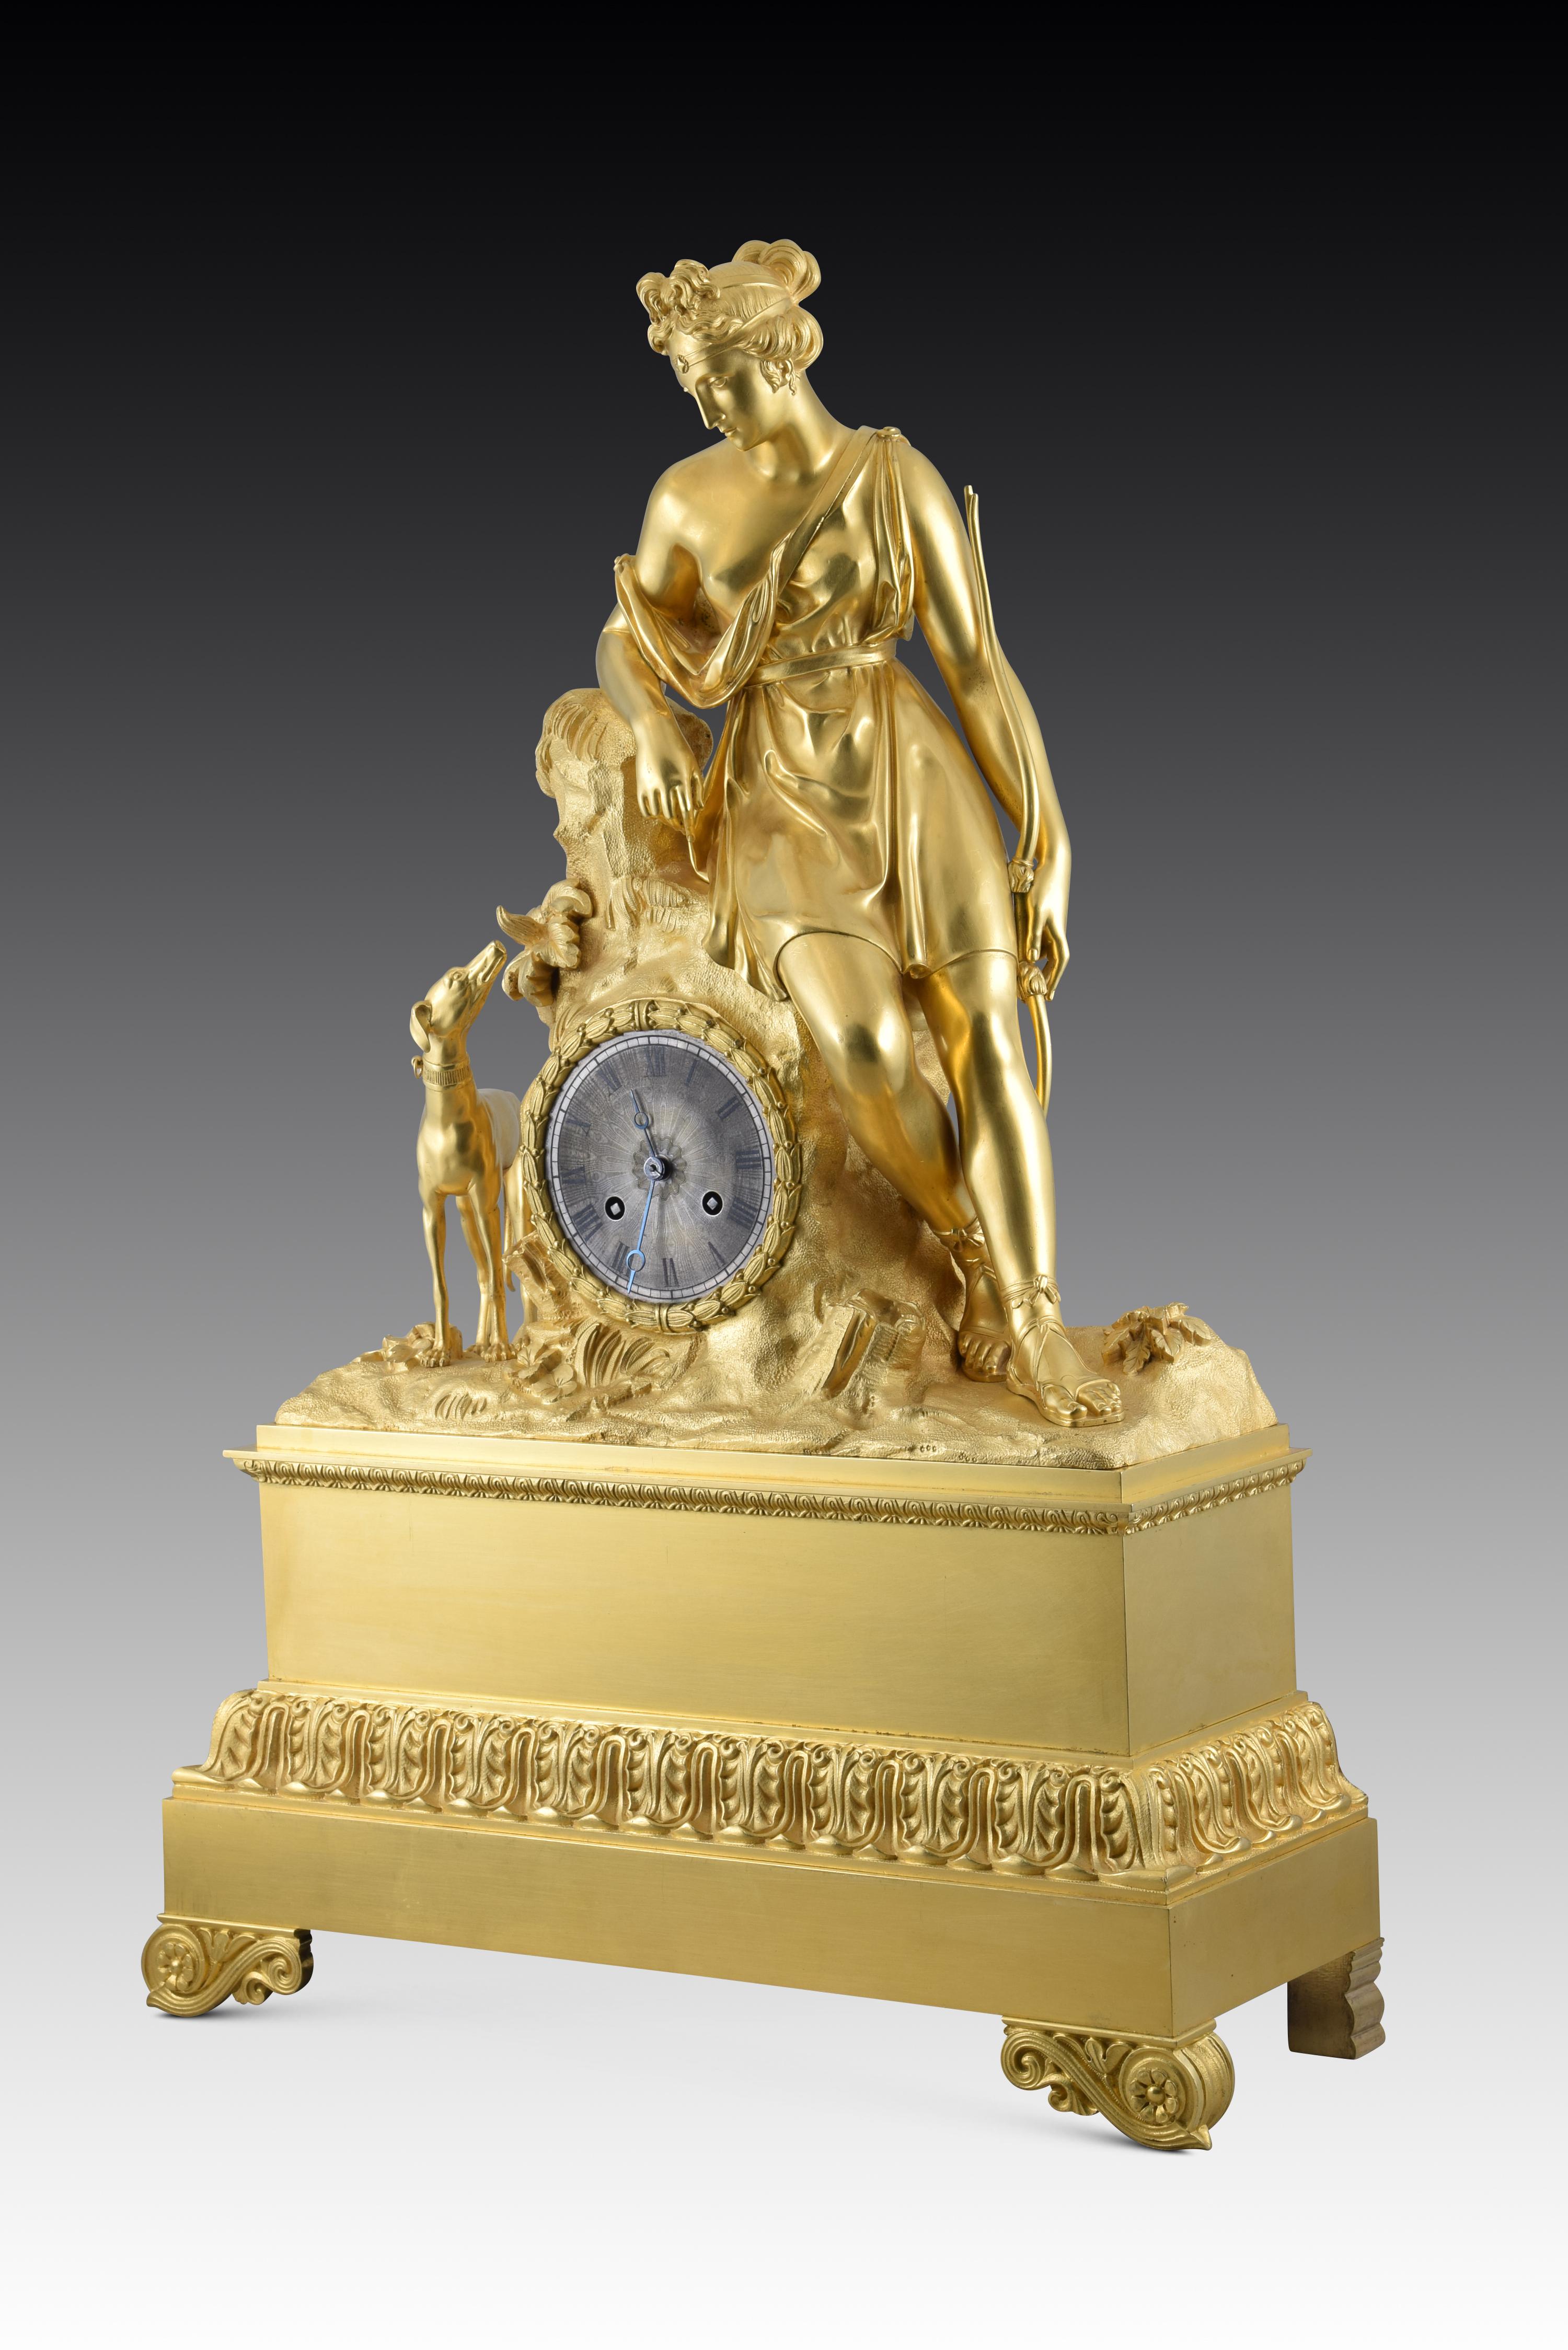 Neoclassical Revival Table clock, Diana. Gilt bronze. France, 19th century. For Sale